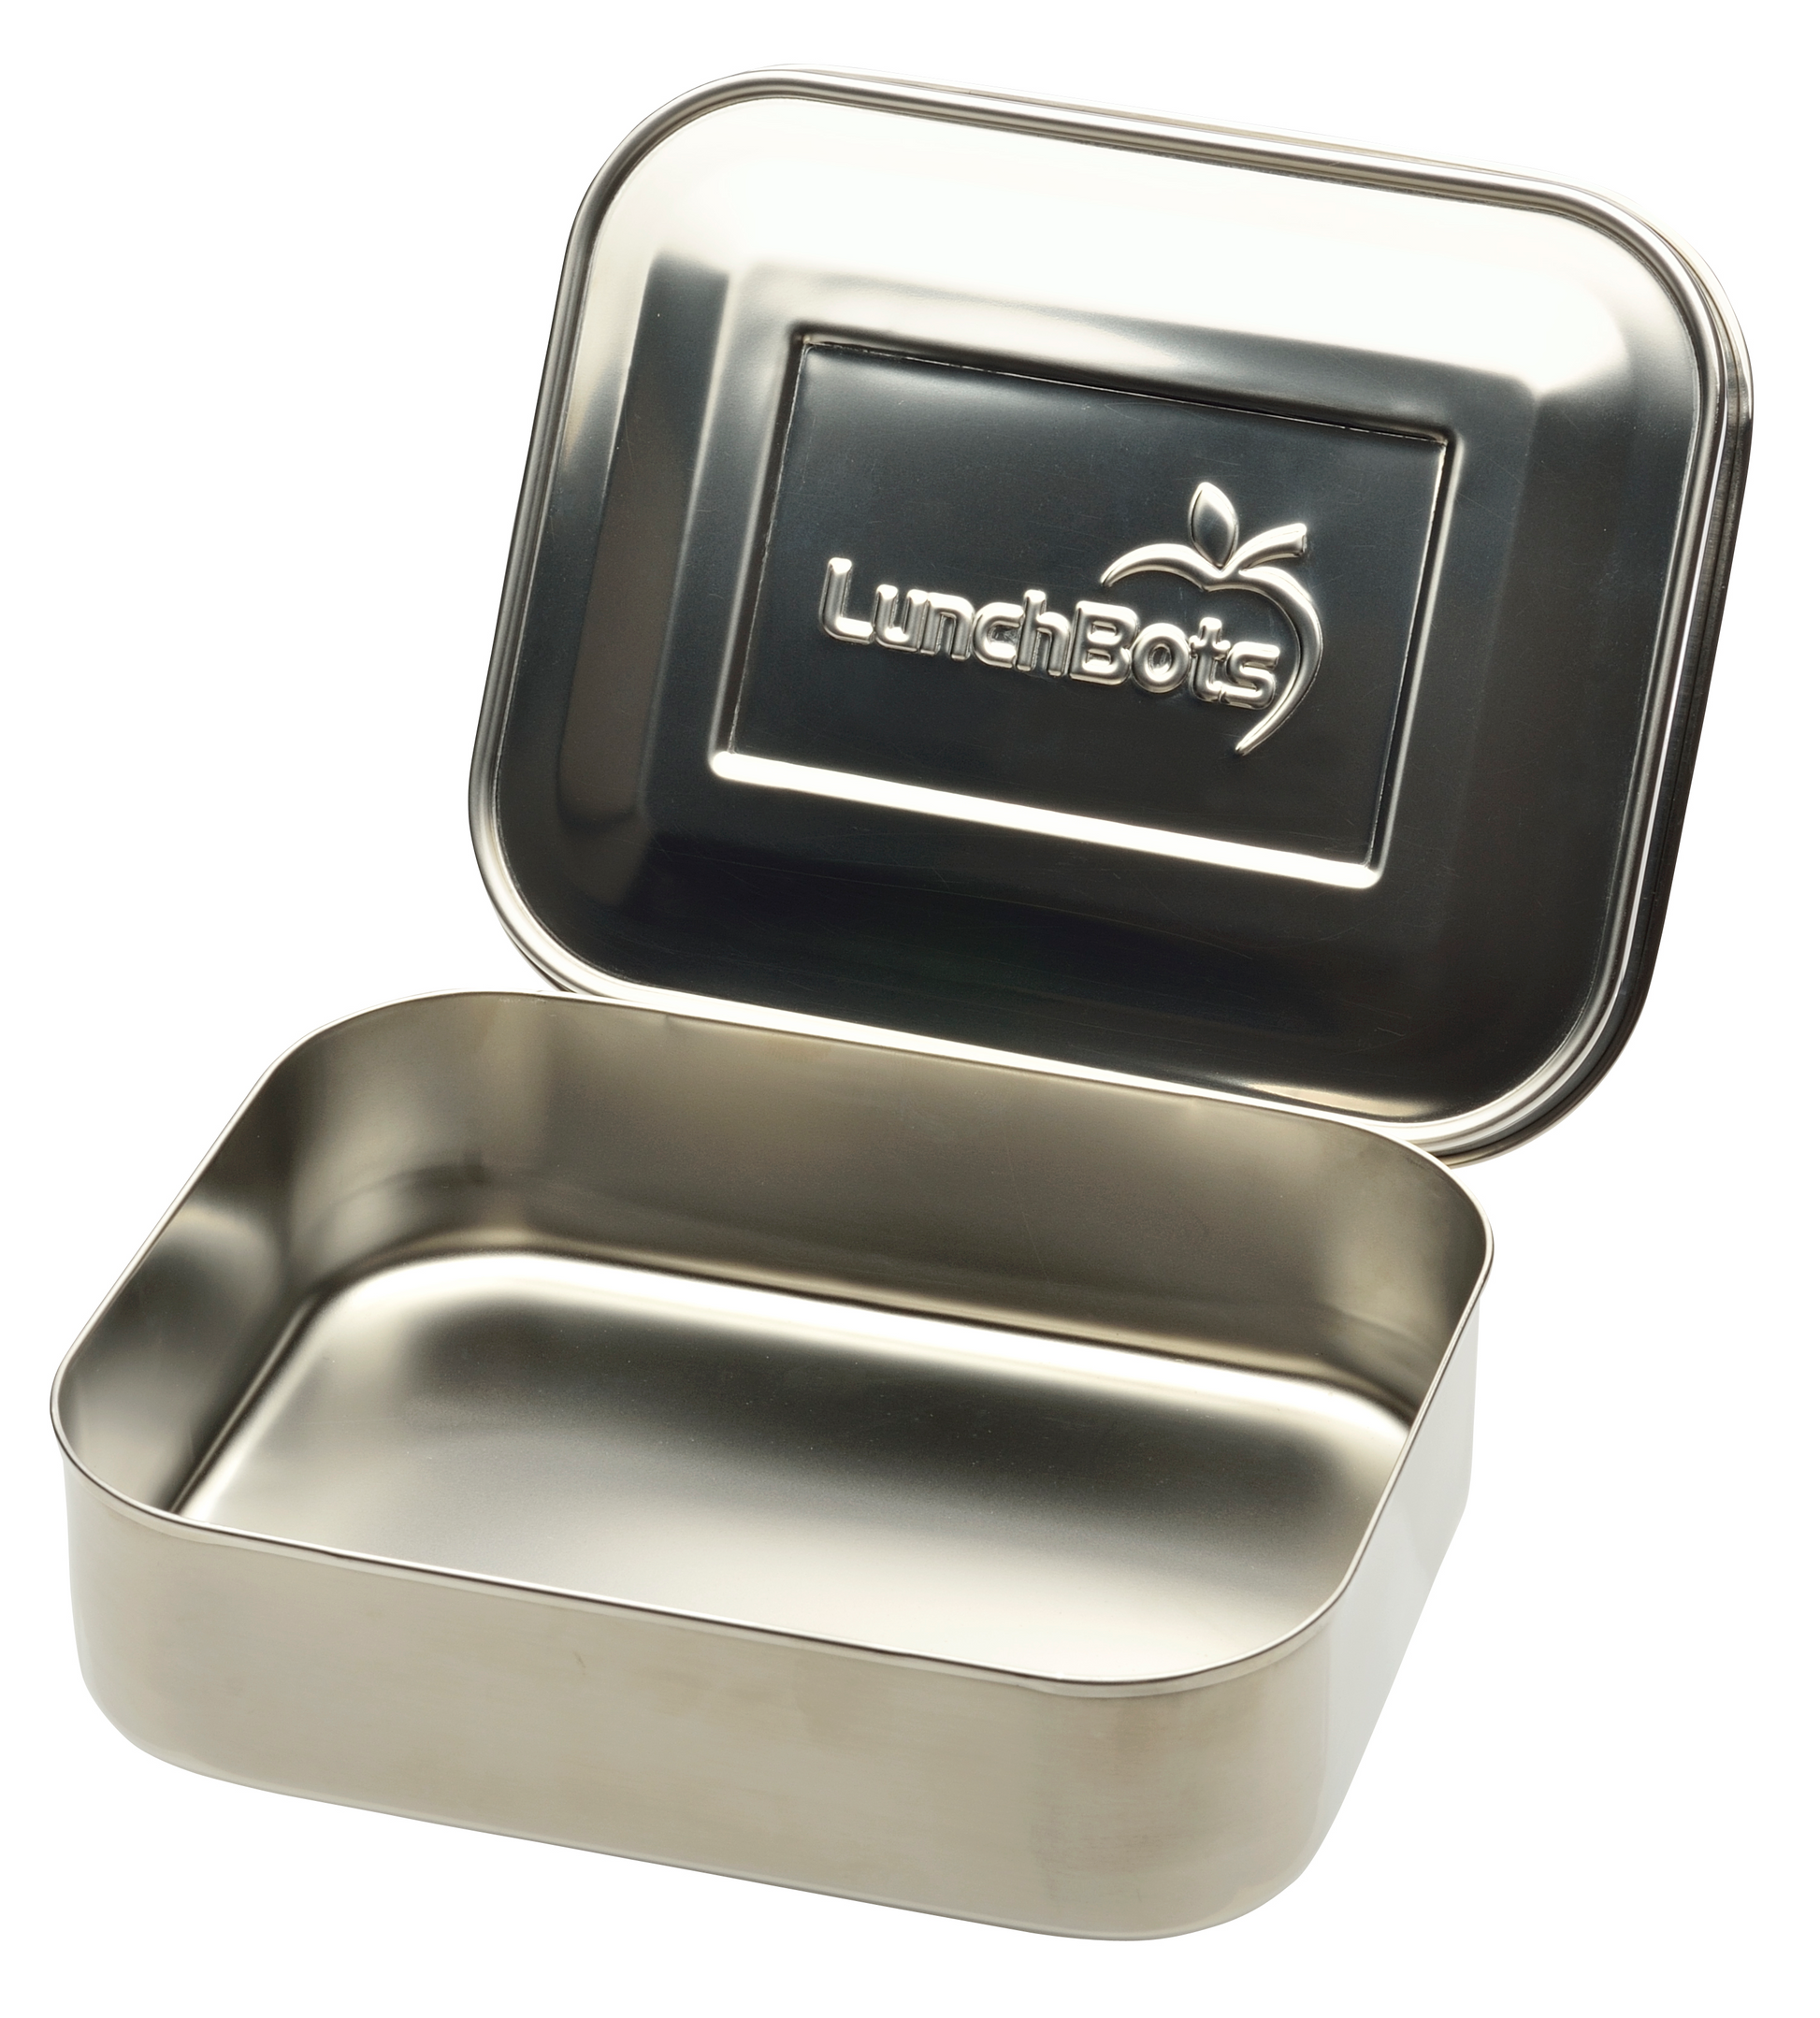 LunchBots Large Trio Stainless Steel Lunch Container -Three Section Design for Sandwich and Two Sides - Metal Bento Lunch Box